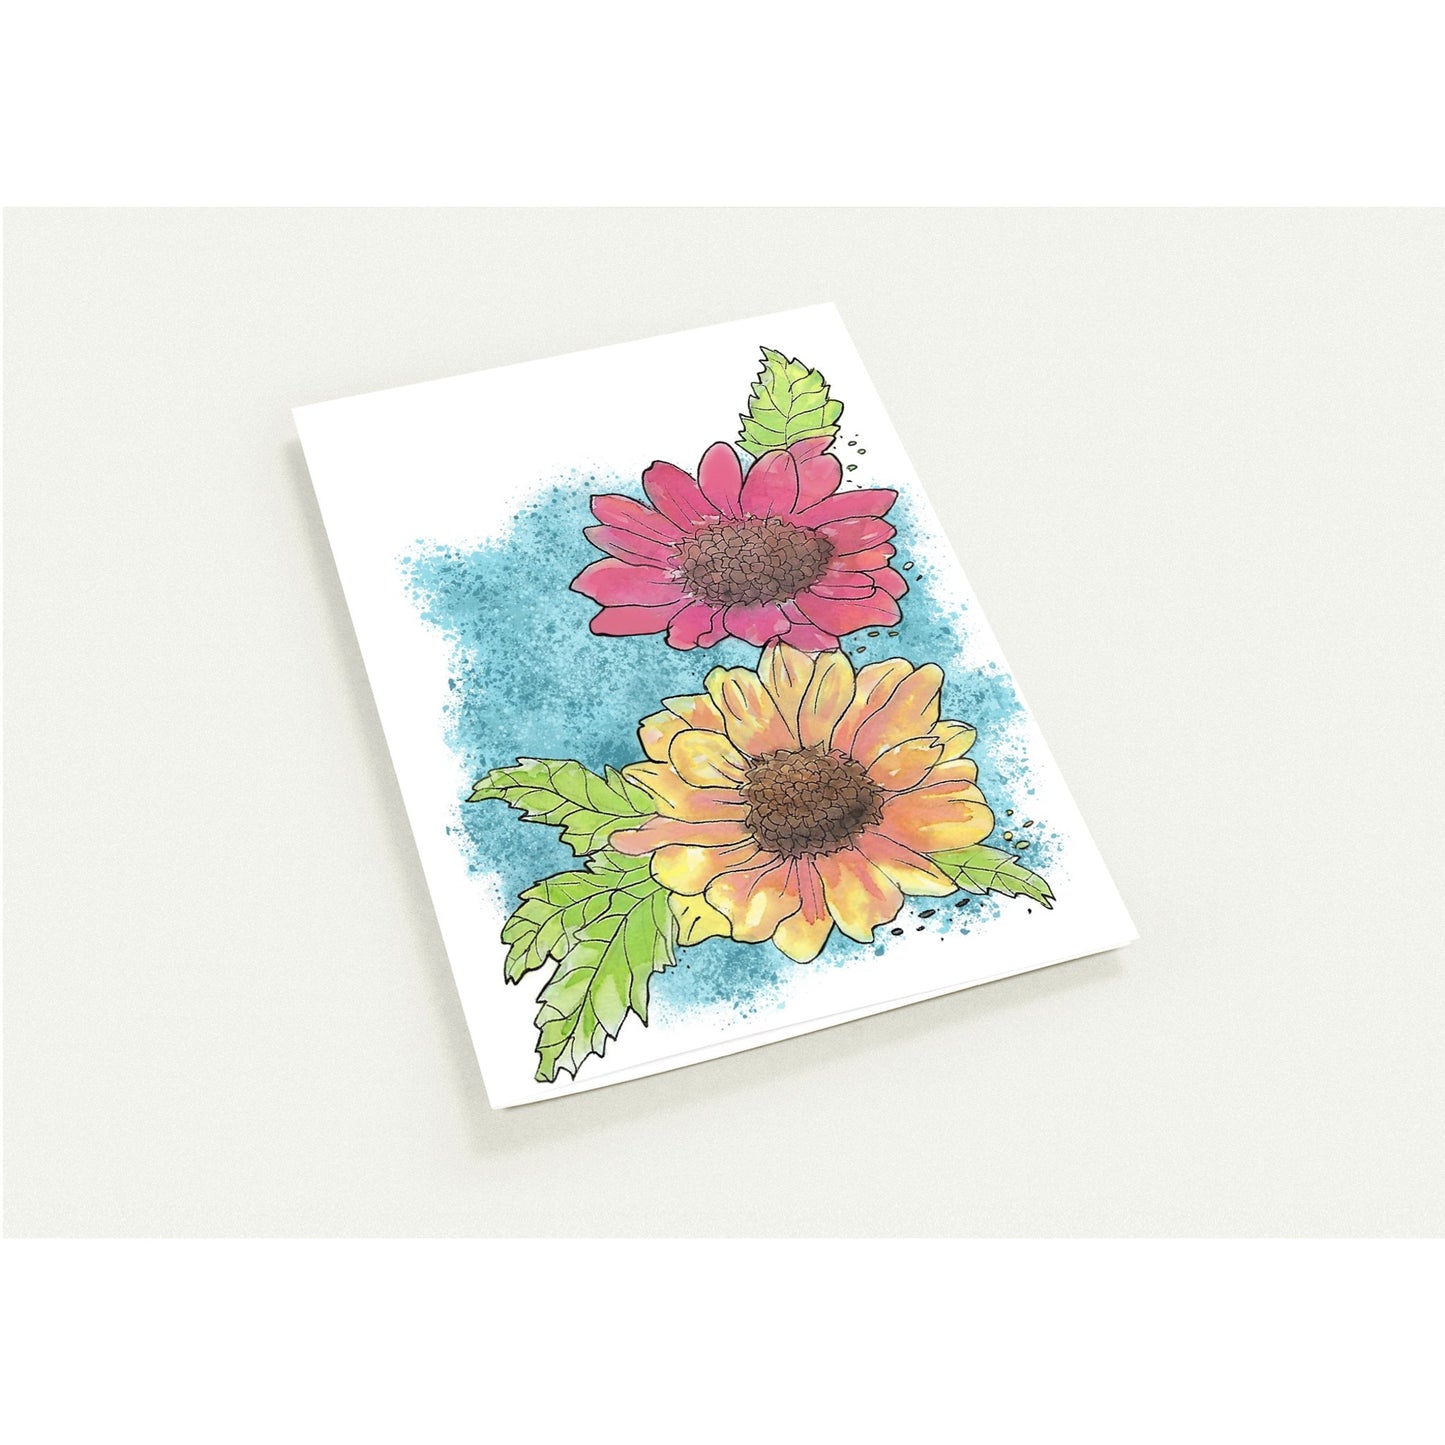 4.25 by 5.5 inch Gerber daisies set of 10 greeting cards and 10 envelopes. Printed on glossy paperboard. Front has a print of watercolor Gerber daisies on a blue accent. Inside has a blue watercolor border with daisy accents.